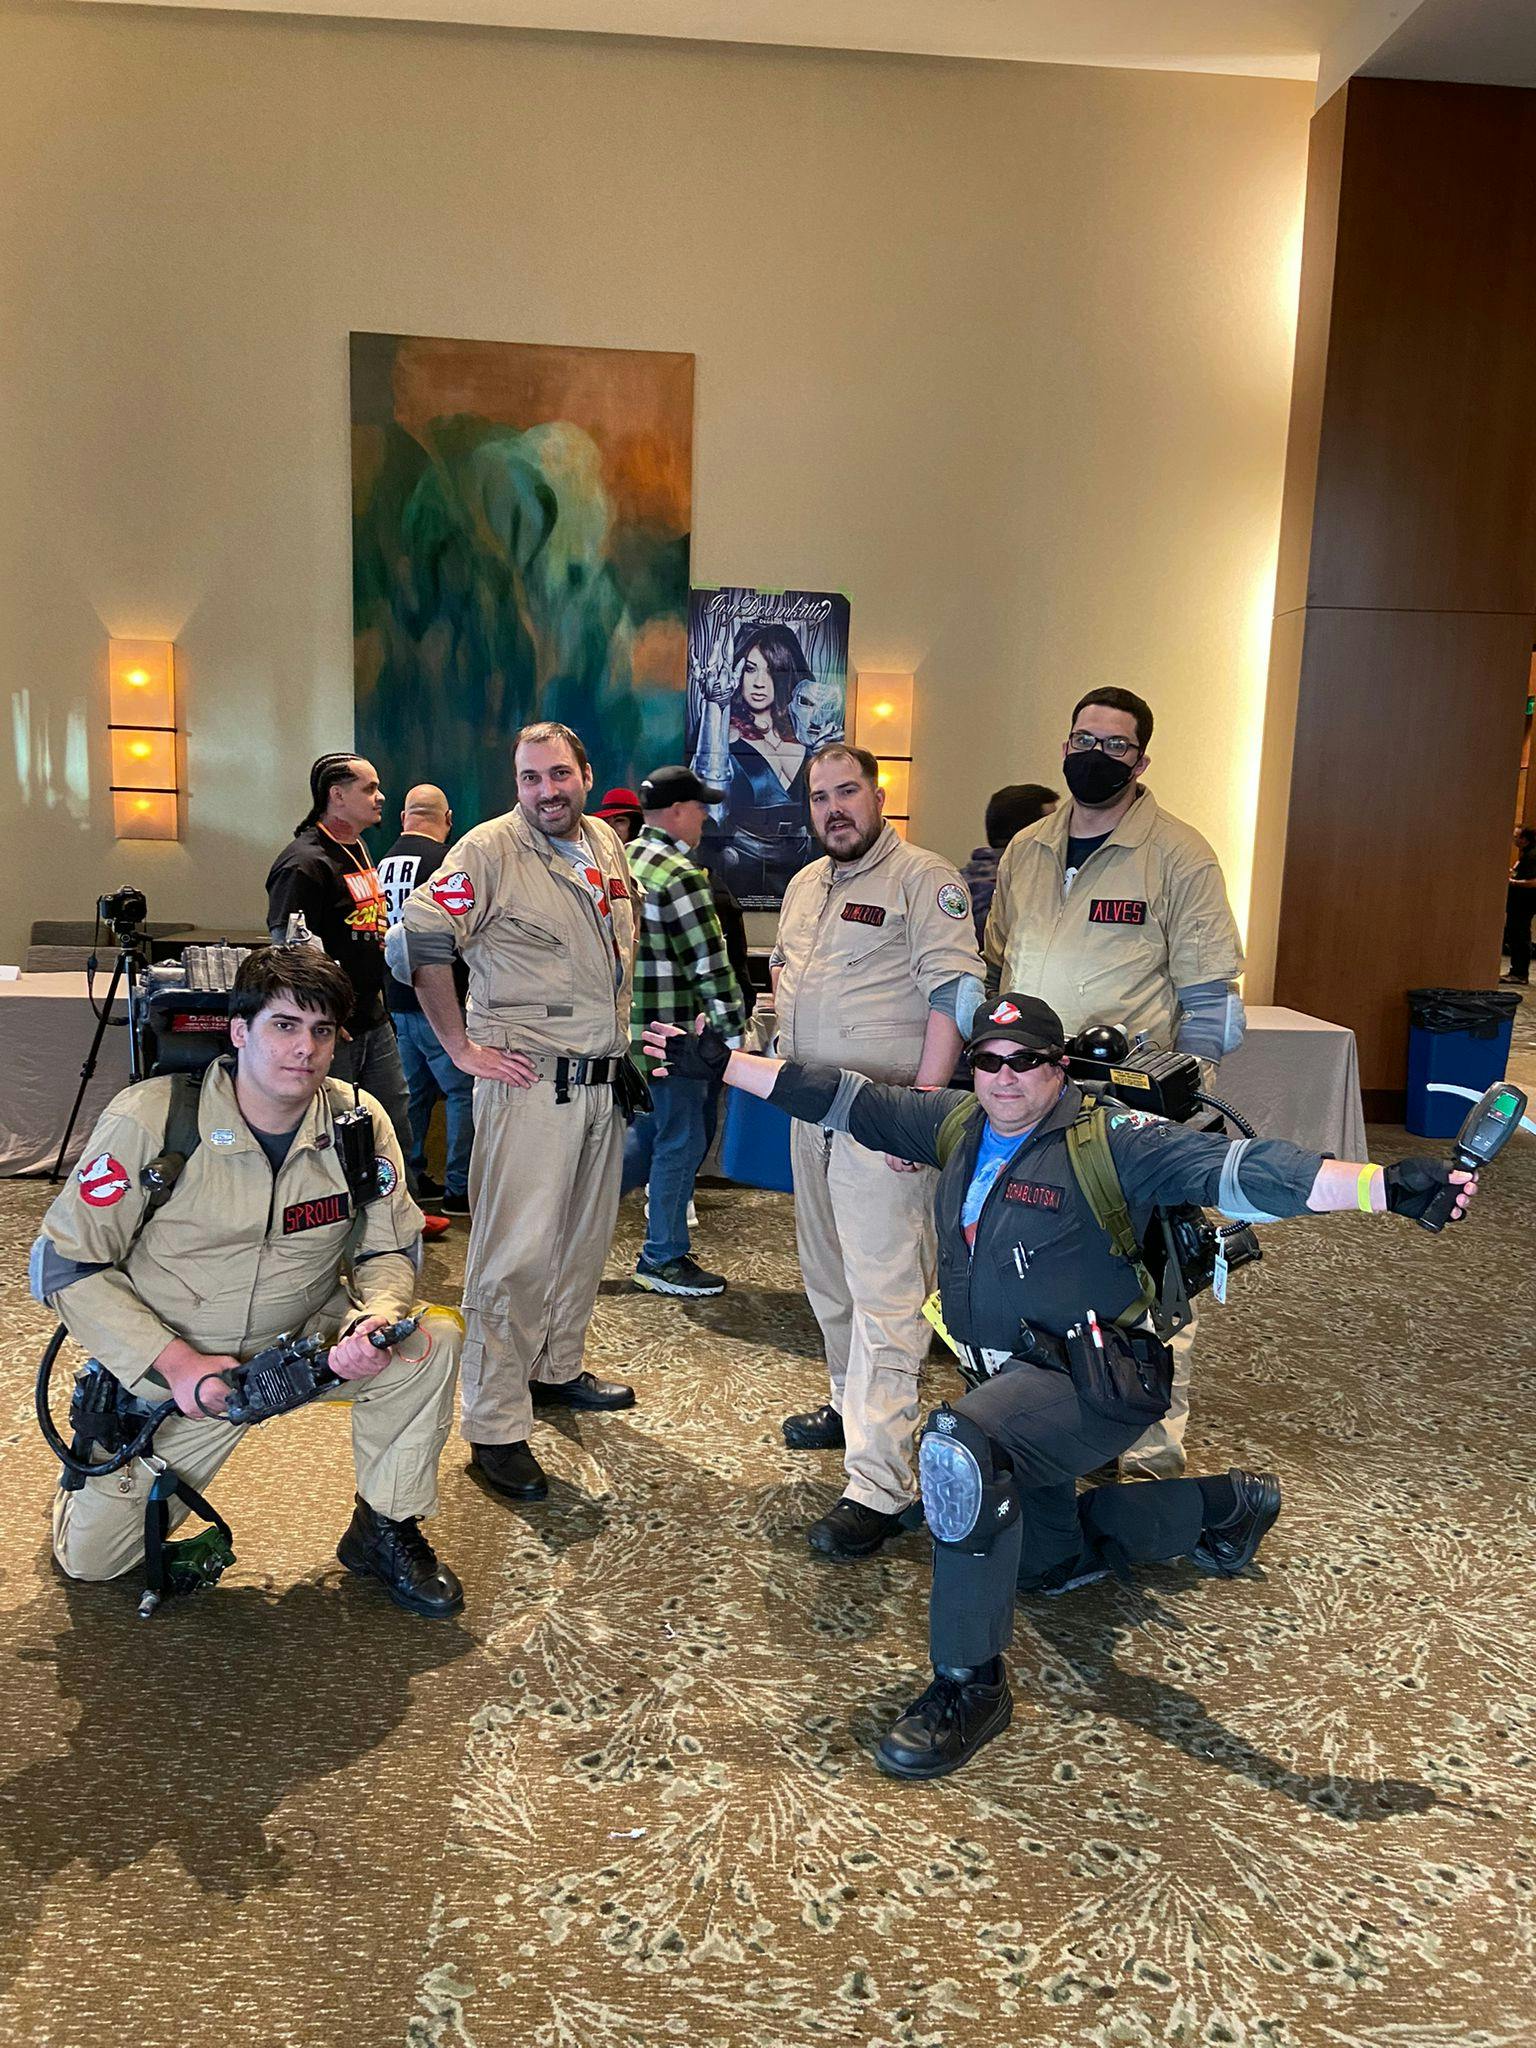 Ghostbusters cosplay at Wicked Comic Con Boston